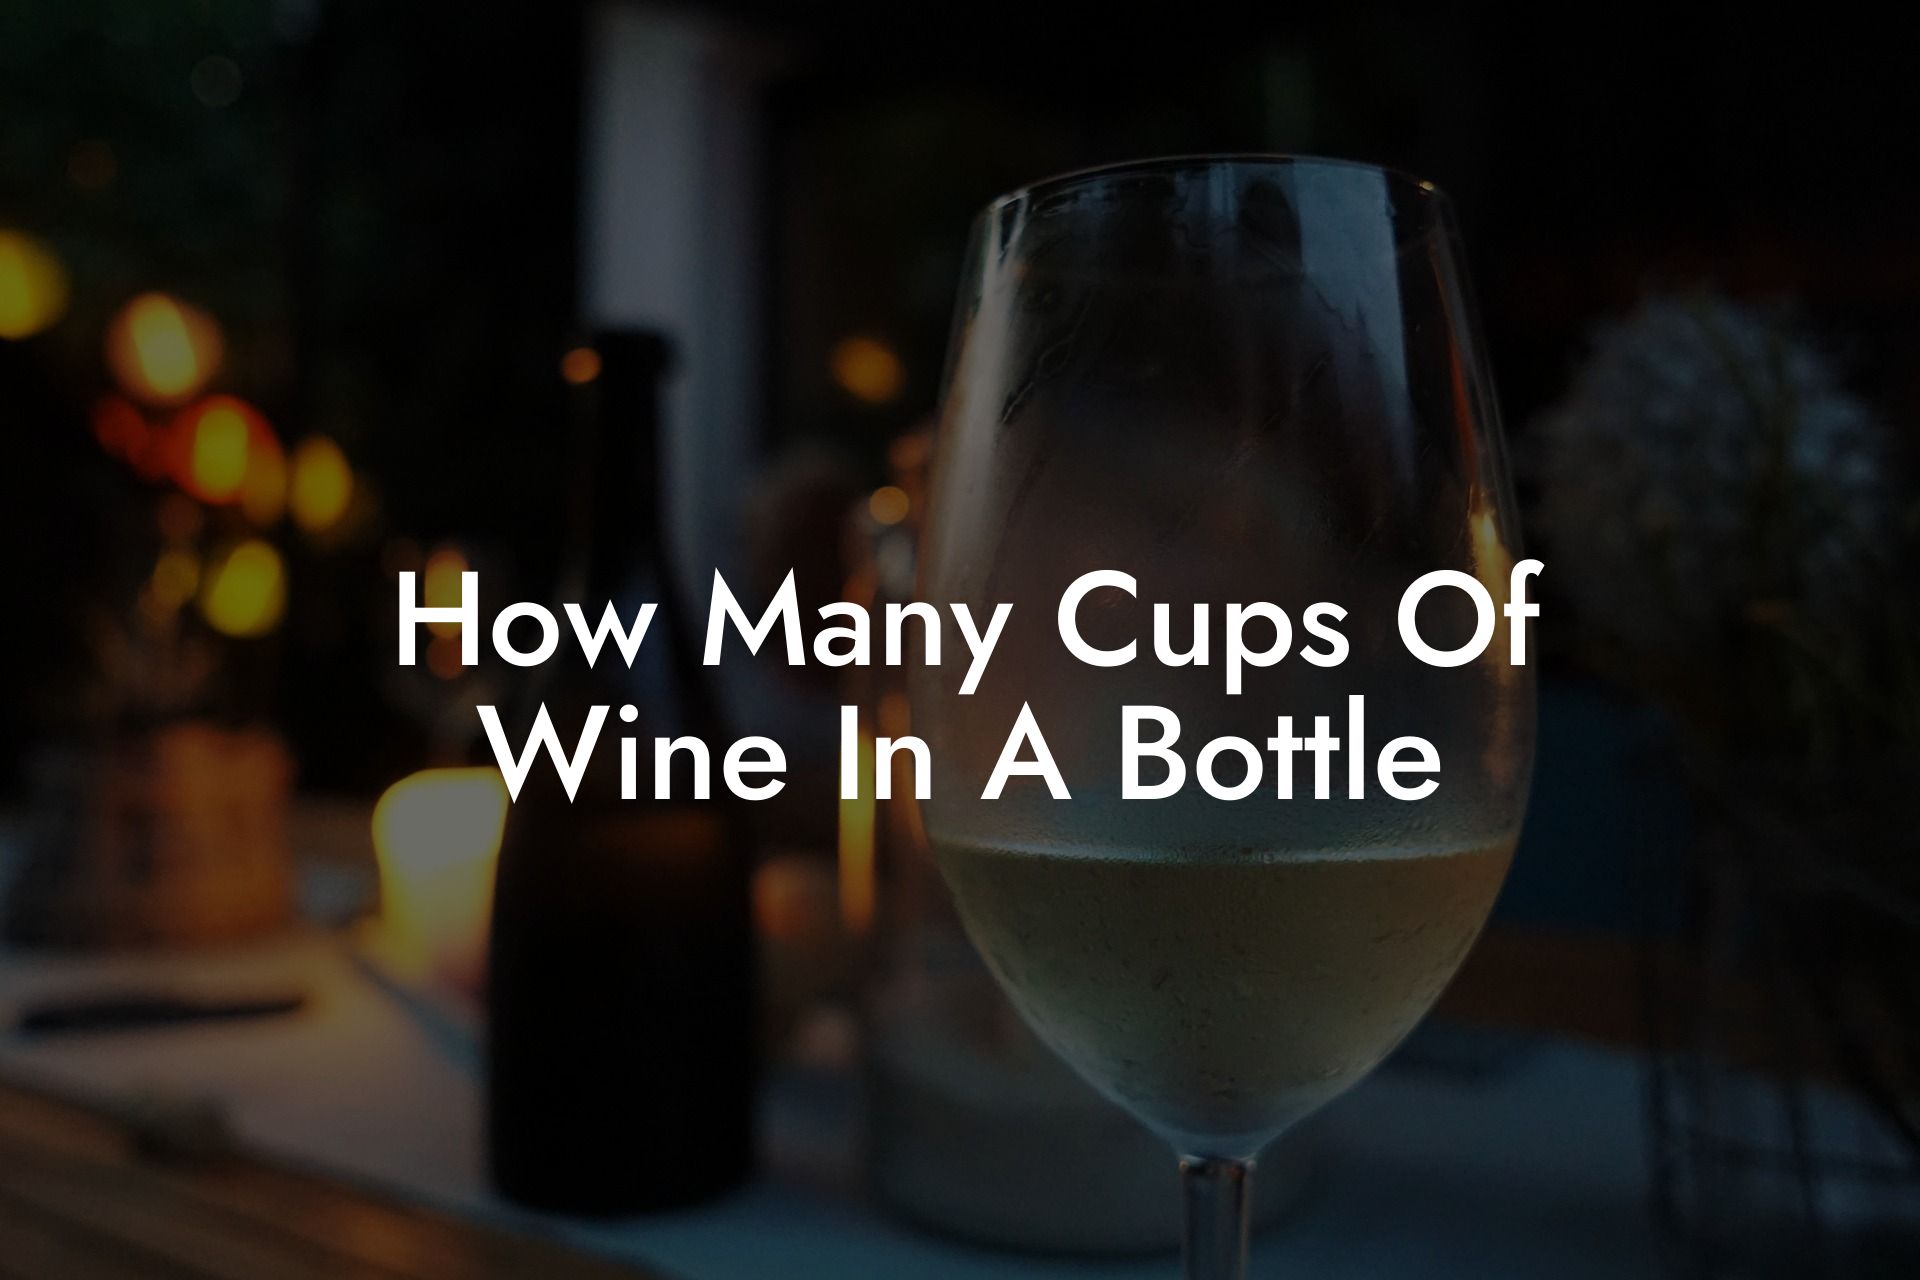 How Many Cups Of Wine In A Bottle